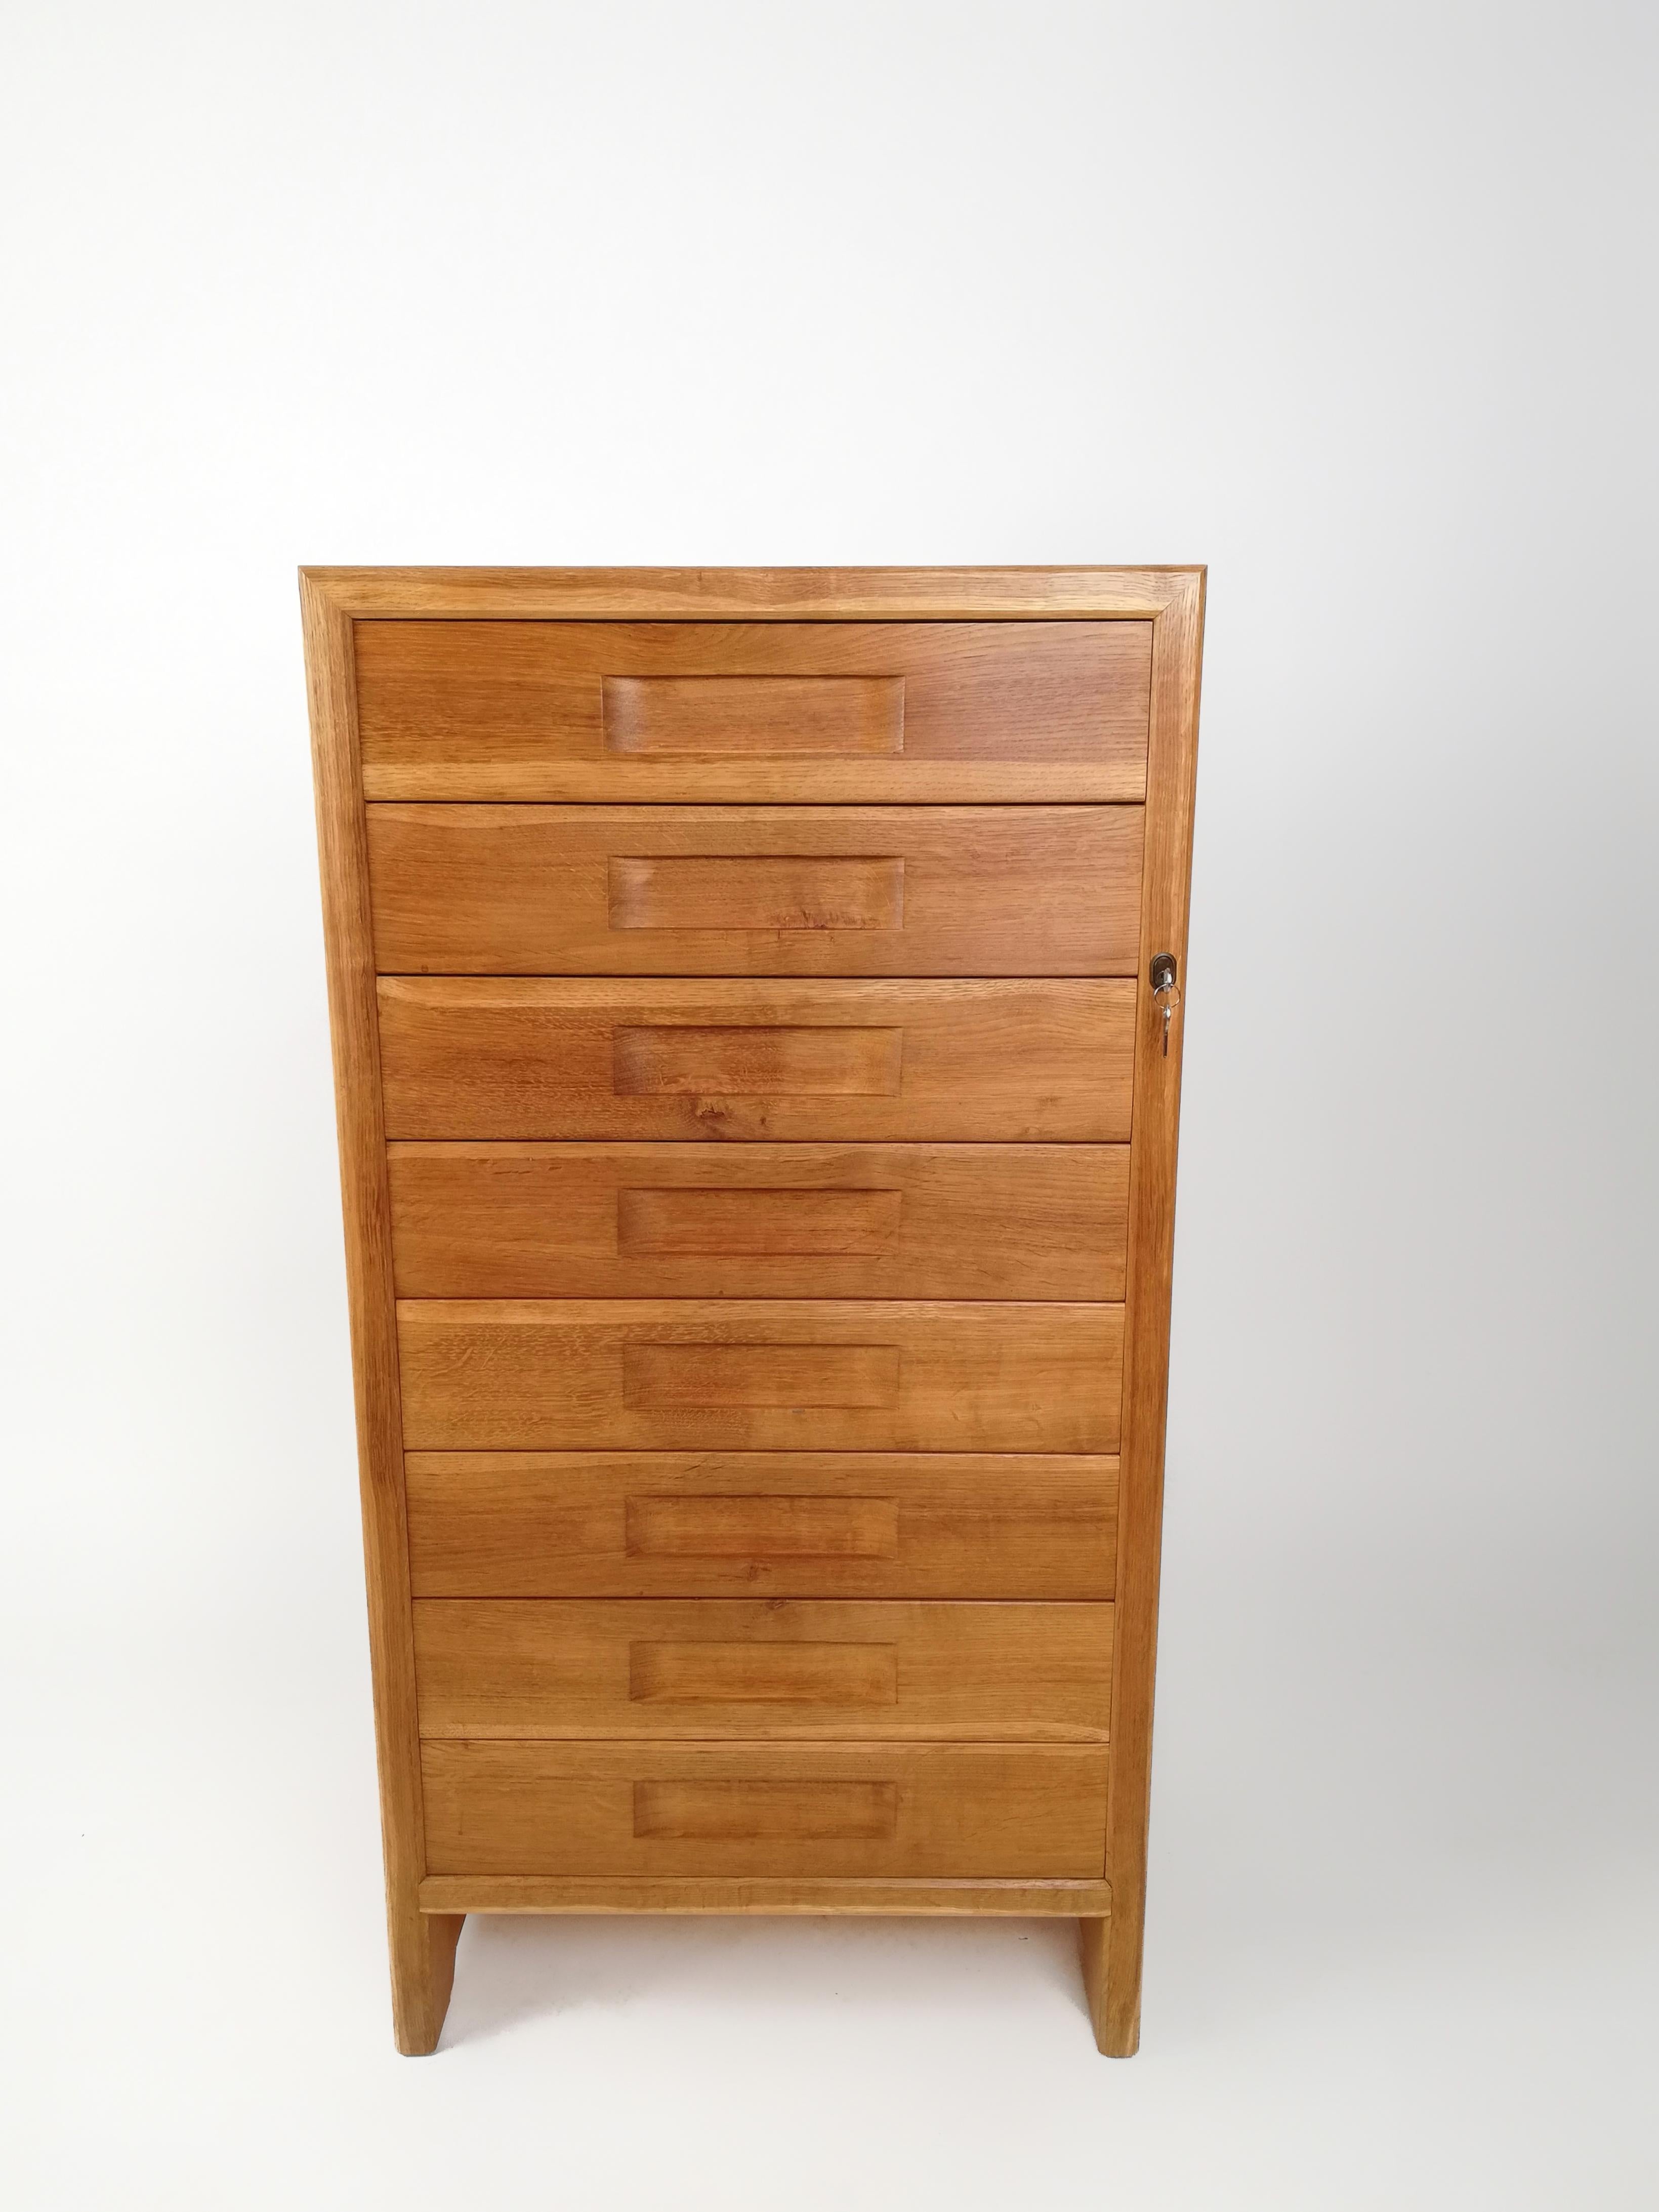 Italian Vintage Oak and Birch Wood Office Tallboy Chest of Drawers, 1960s For Sale 12